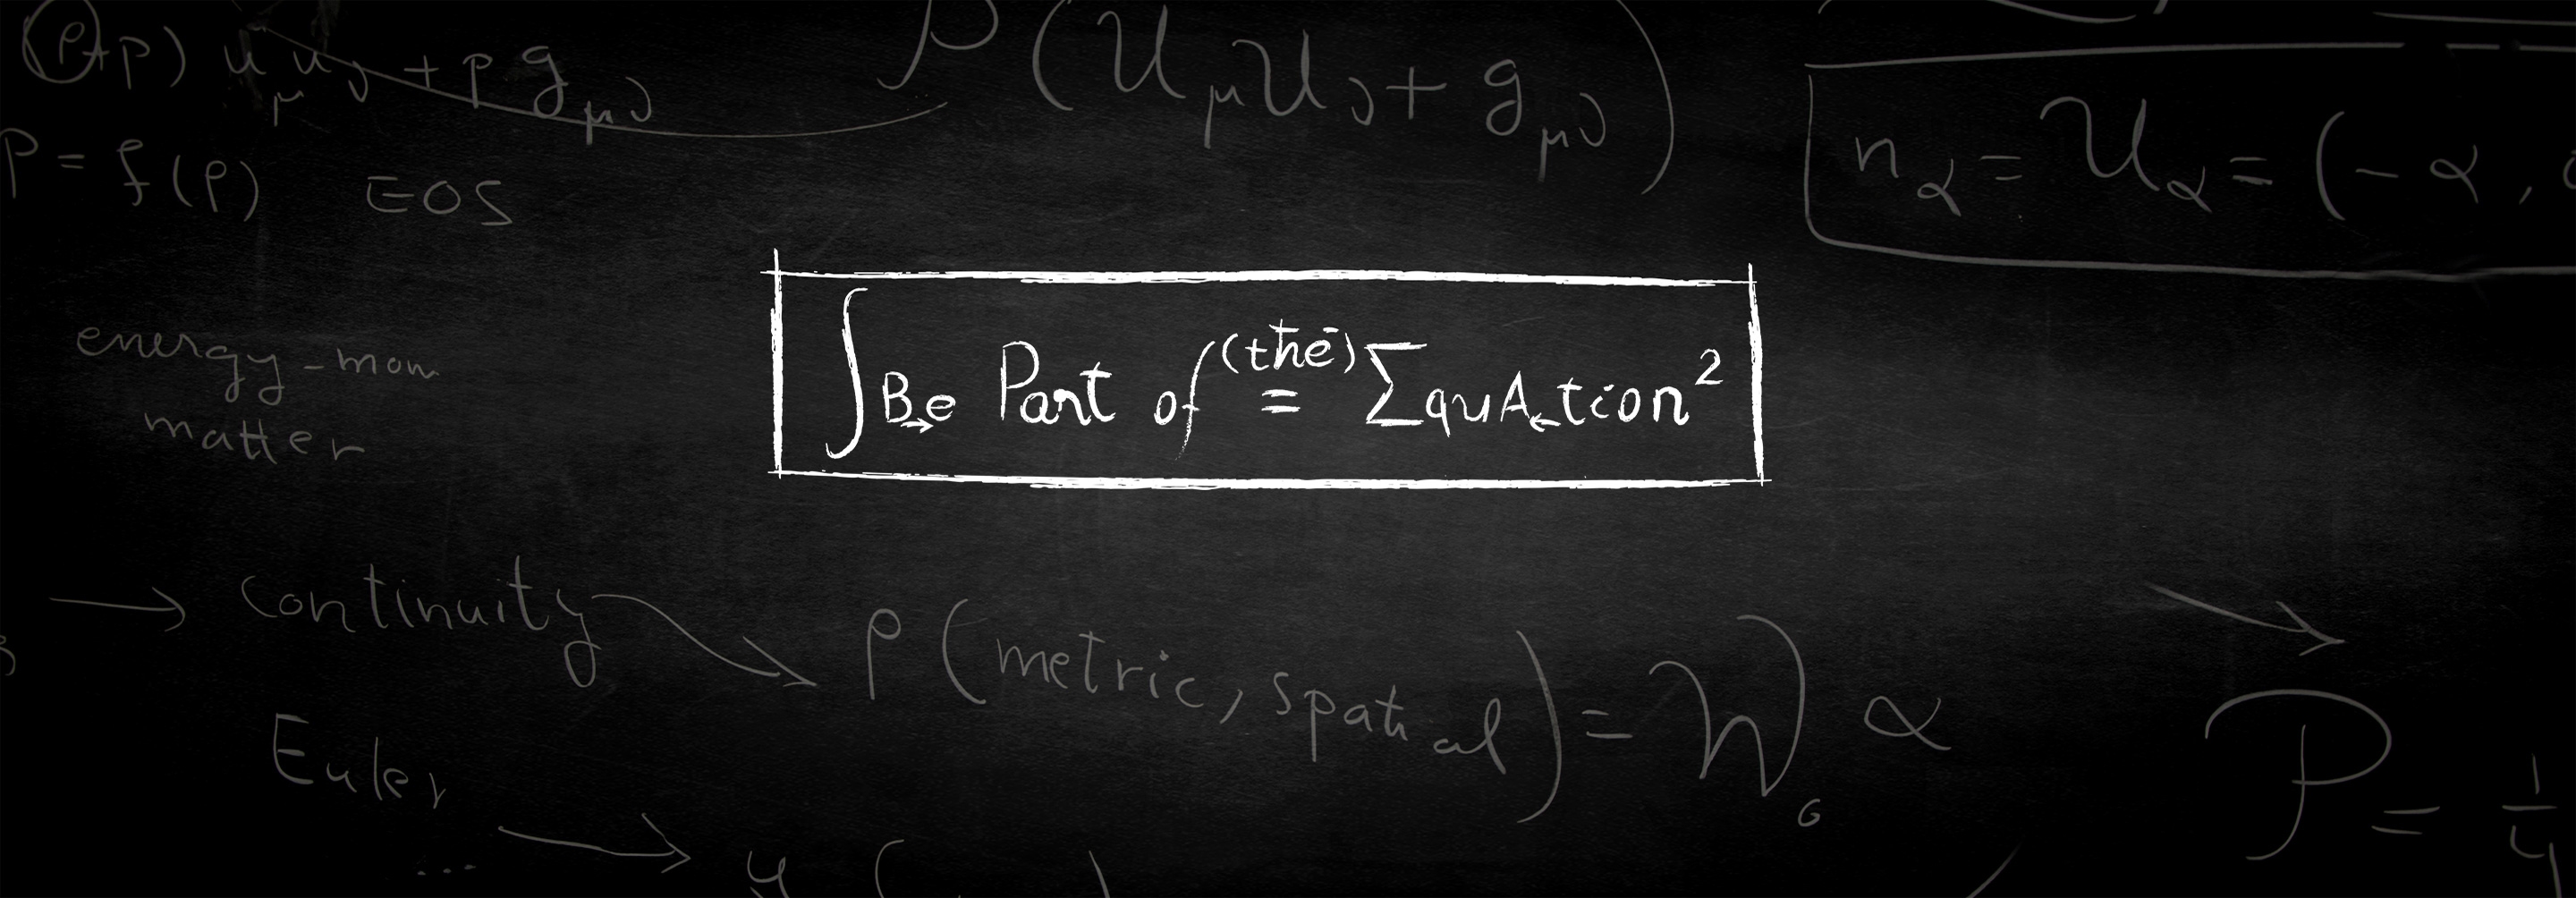 Blackboard background with Be part of the Equation